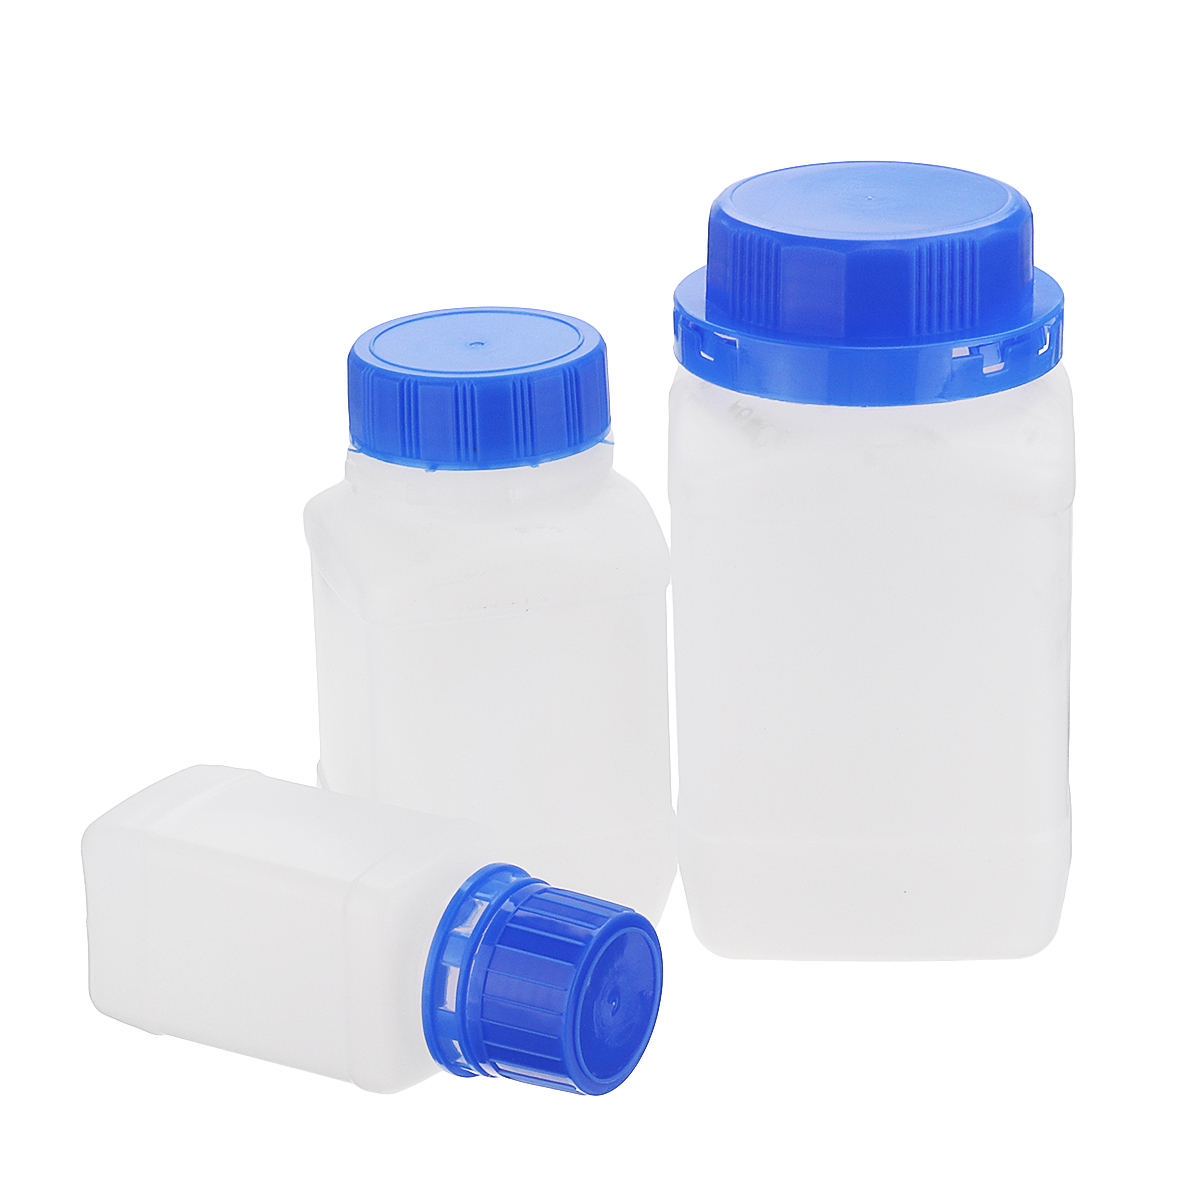 

100/250/500ml Plastic Square Sample Sealing Bottle Wide Mouth Reagent Bottles with Blue Screw Cap Laboratory Experiment